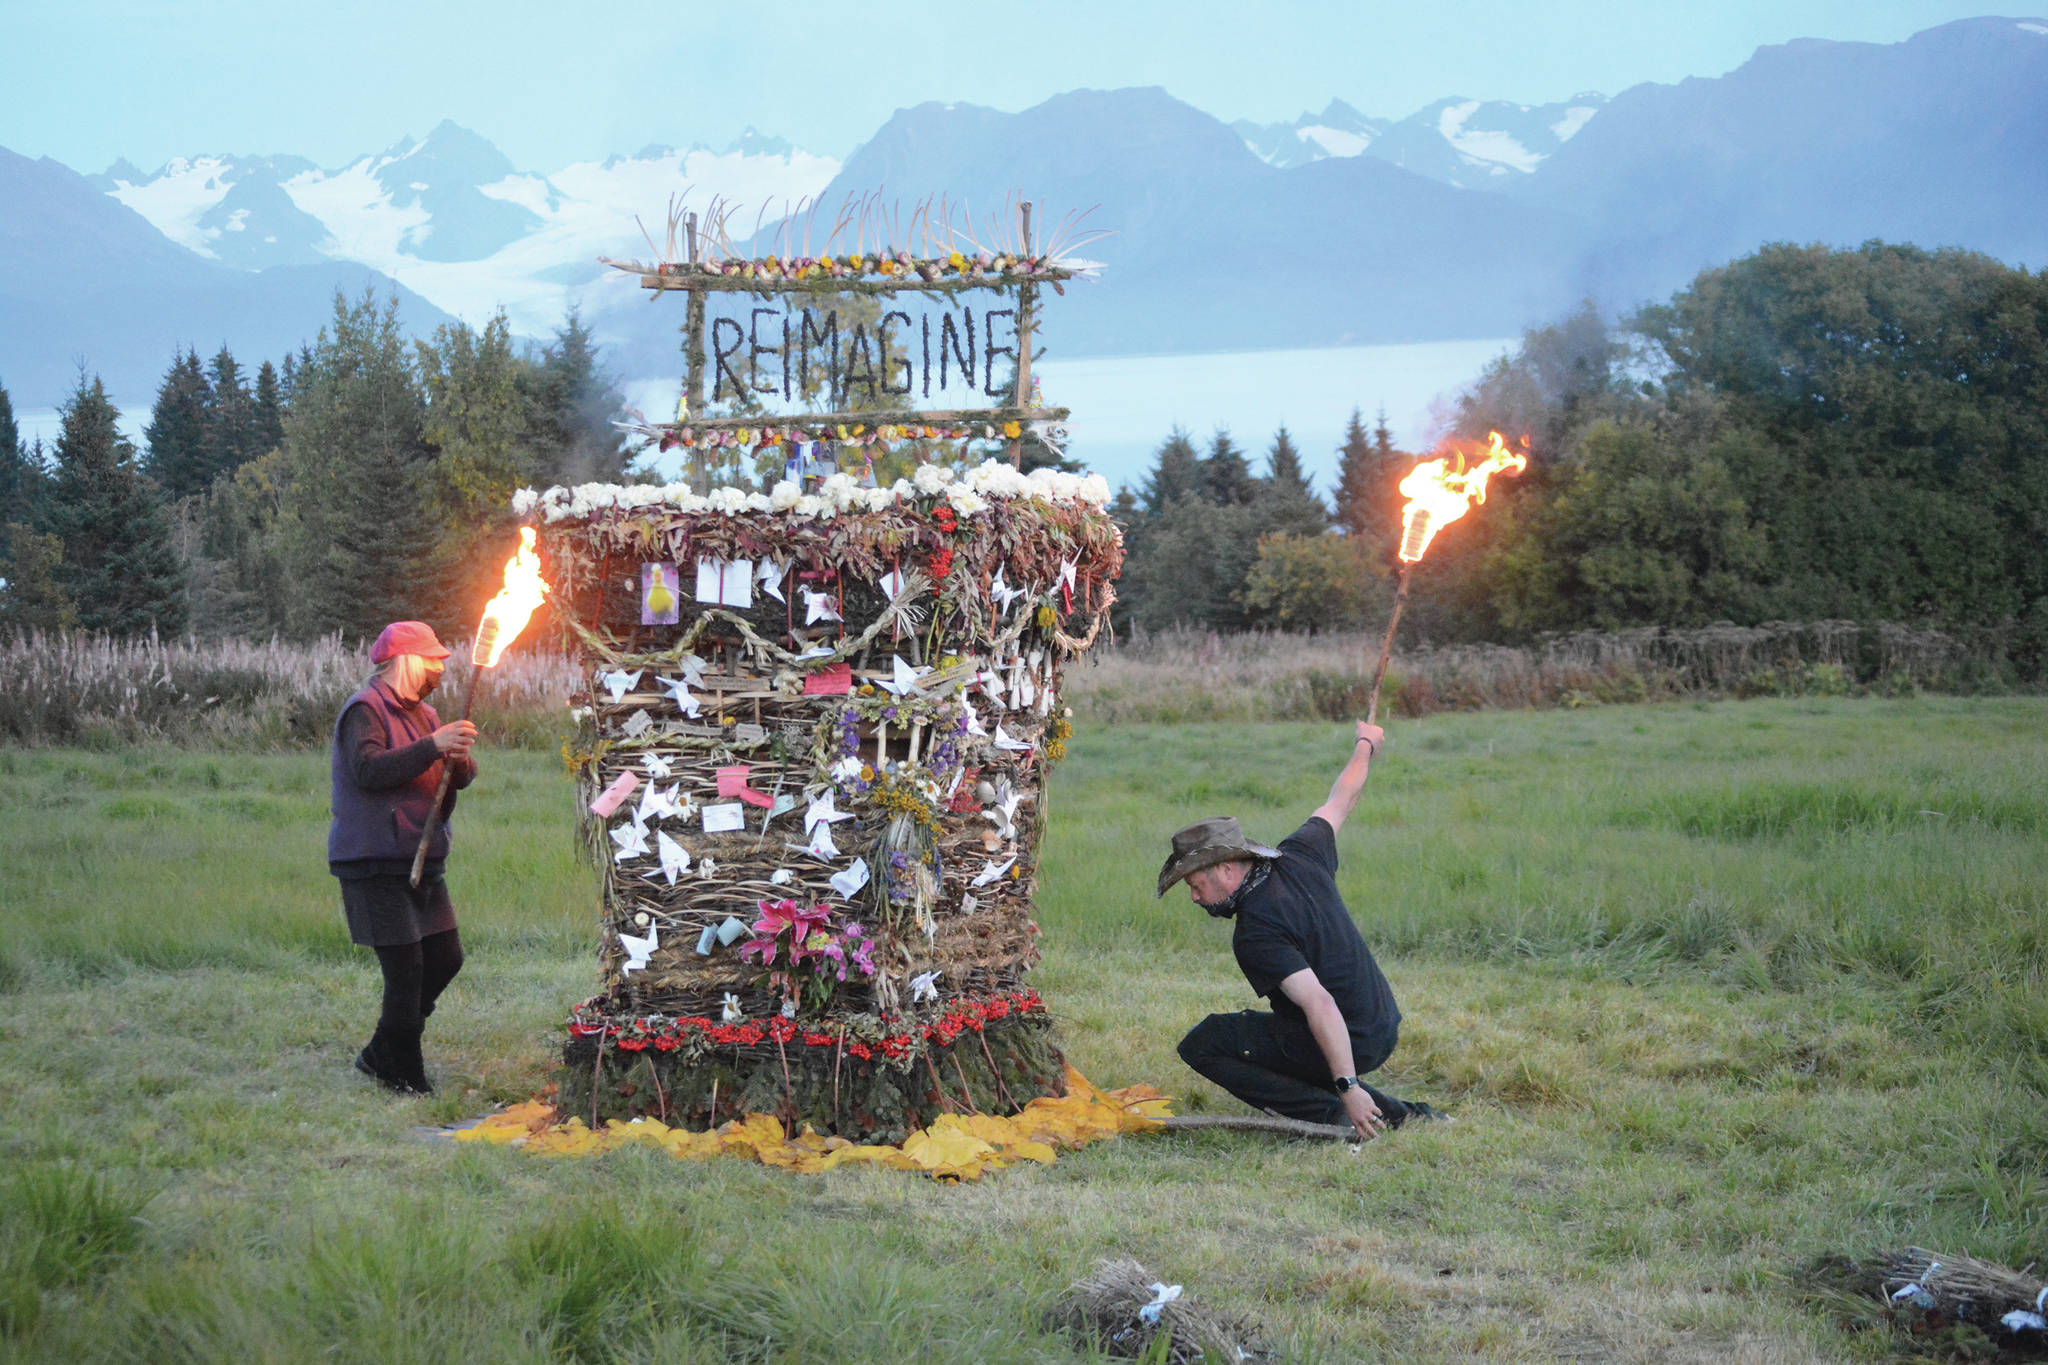 Mavis Muller, left, and Matt Steffy, right, light on fire “Reimagine,” the 17th annual Burning Basket, in a field on Sunday, Sept. 13, 2020, near Homer, Alaska. Artist and coordinator Muller intended to broadcast live on Facebook and YouTube the burning of the basket, but because of technical difficulties that didn’t happen. “Burning Basket teaches how to let go of expectations and accept the present moment,” Muller wrote in a text message. “Technology is fickle. The basket, however, did exactly what it promised to do. It helod our collective burderns, our memorials, our joys, sadness, fear, and dispersed all of our good intentions in a plume of smoke, sparks and flames.” (Photo by Michael Armstrong/Homer News)